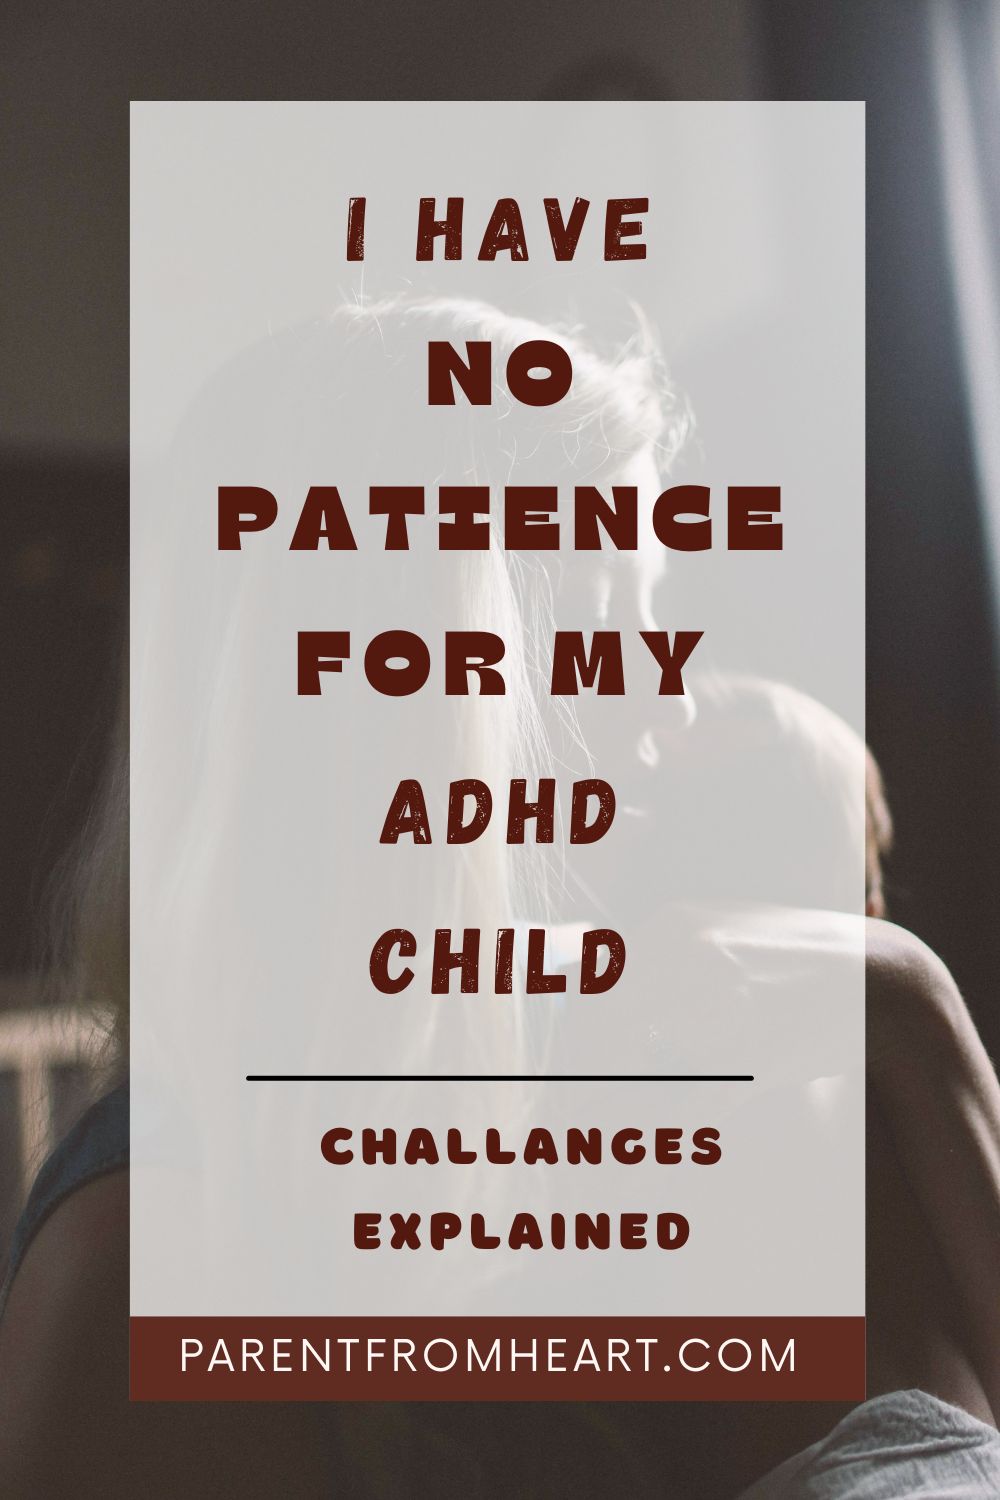 Why I have No Patience for My ADHD Child